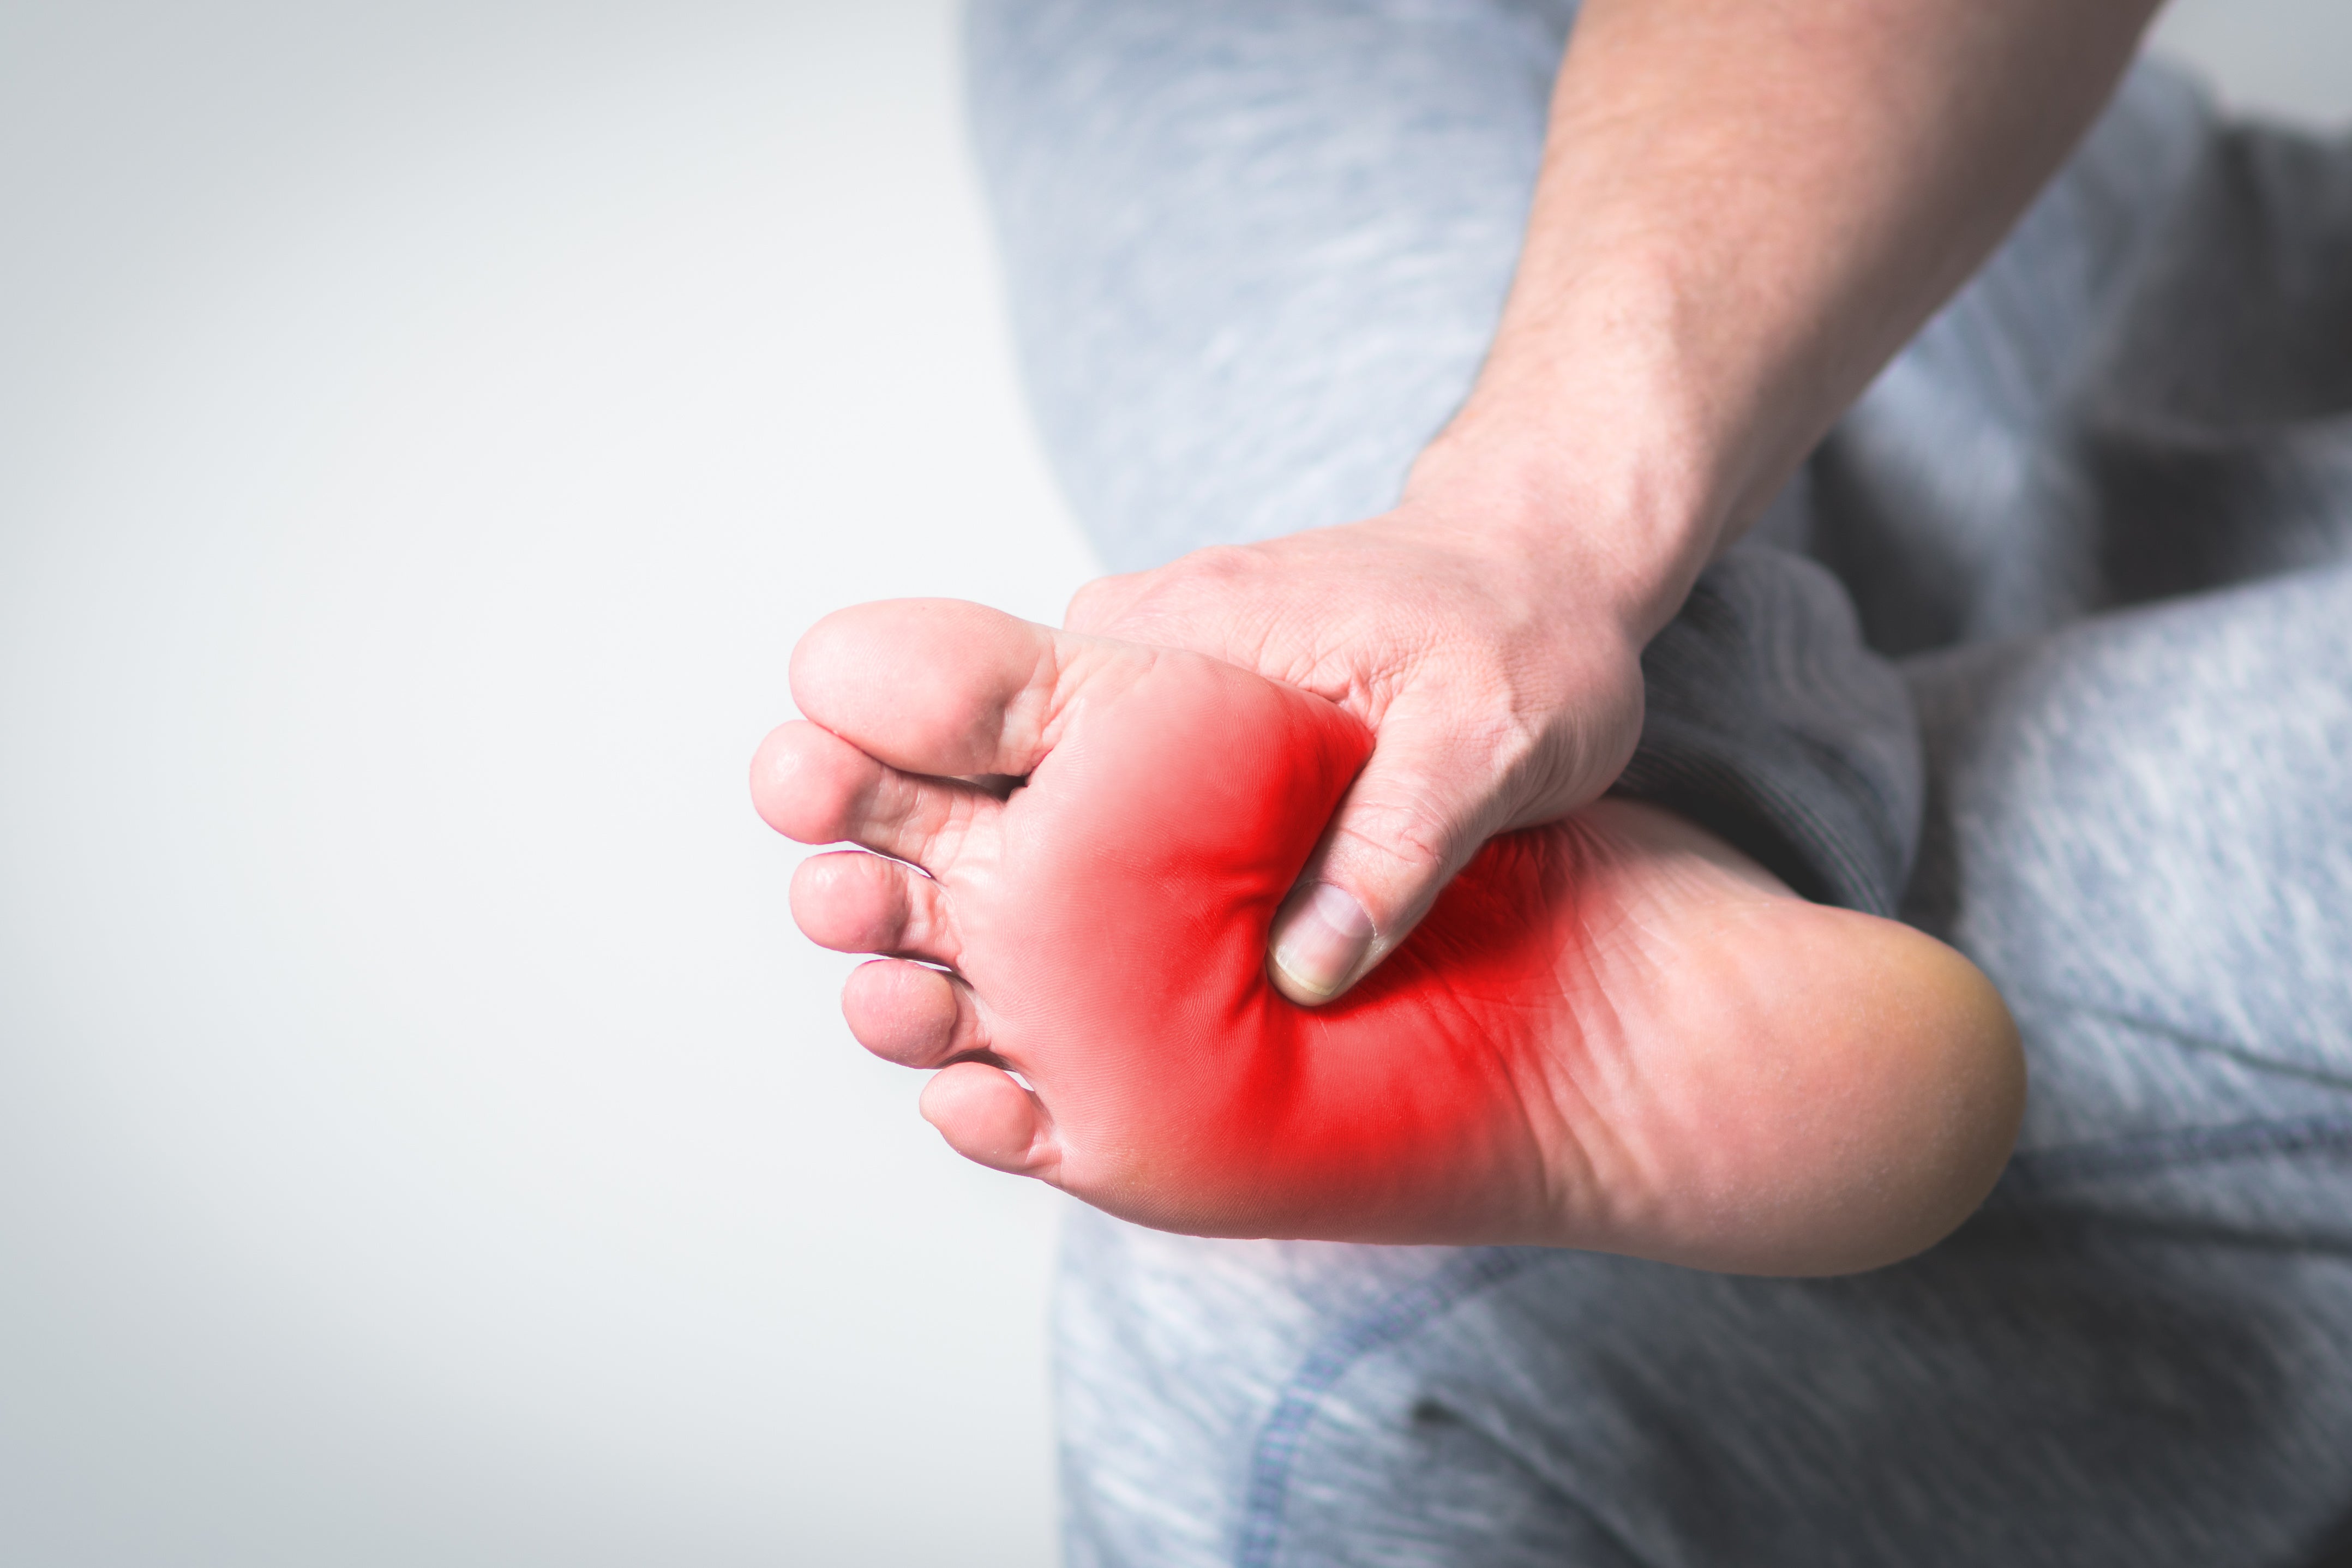 TENS pain therapy for foot pain